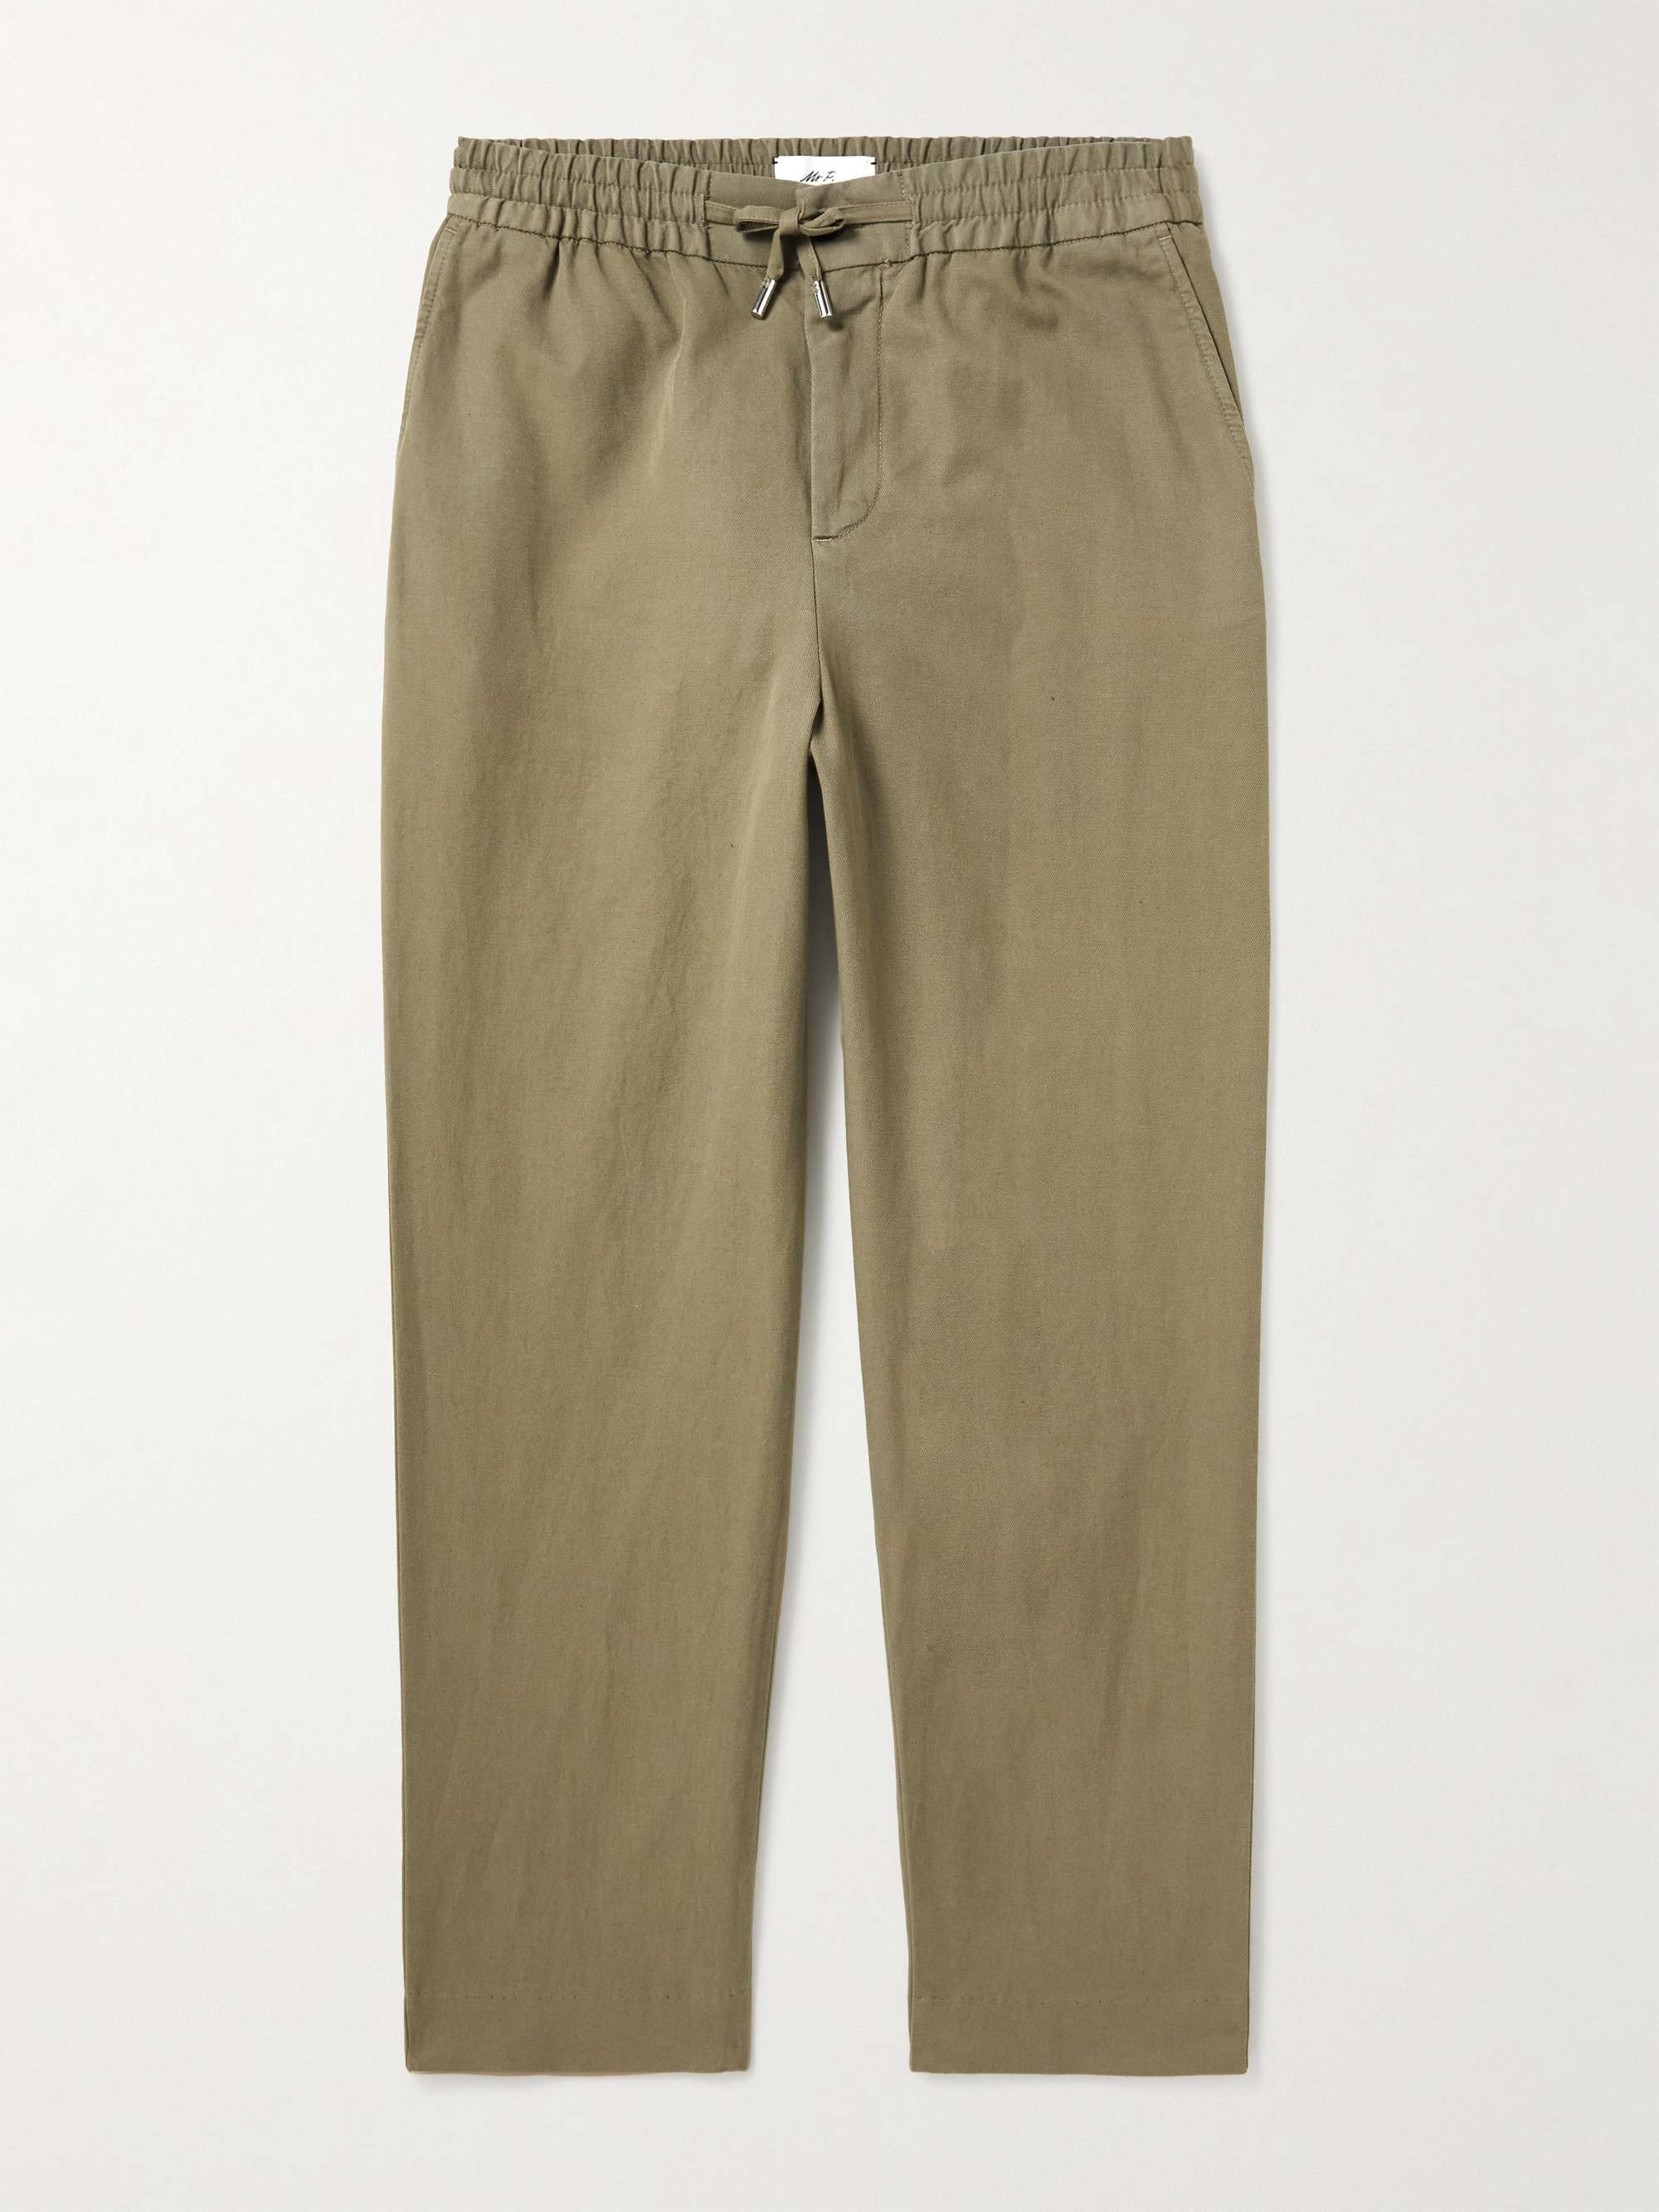 MR P. Cotton and Linen-Blend Twill Drawstring Trousers